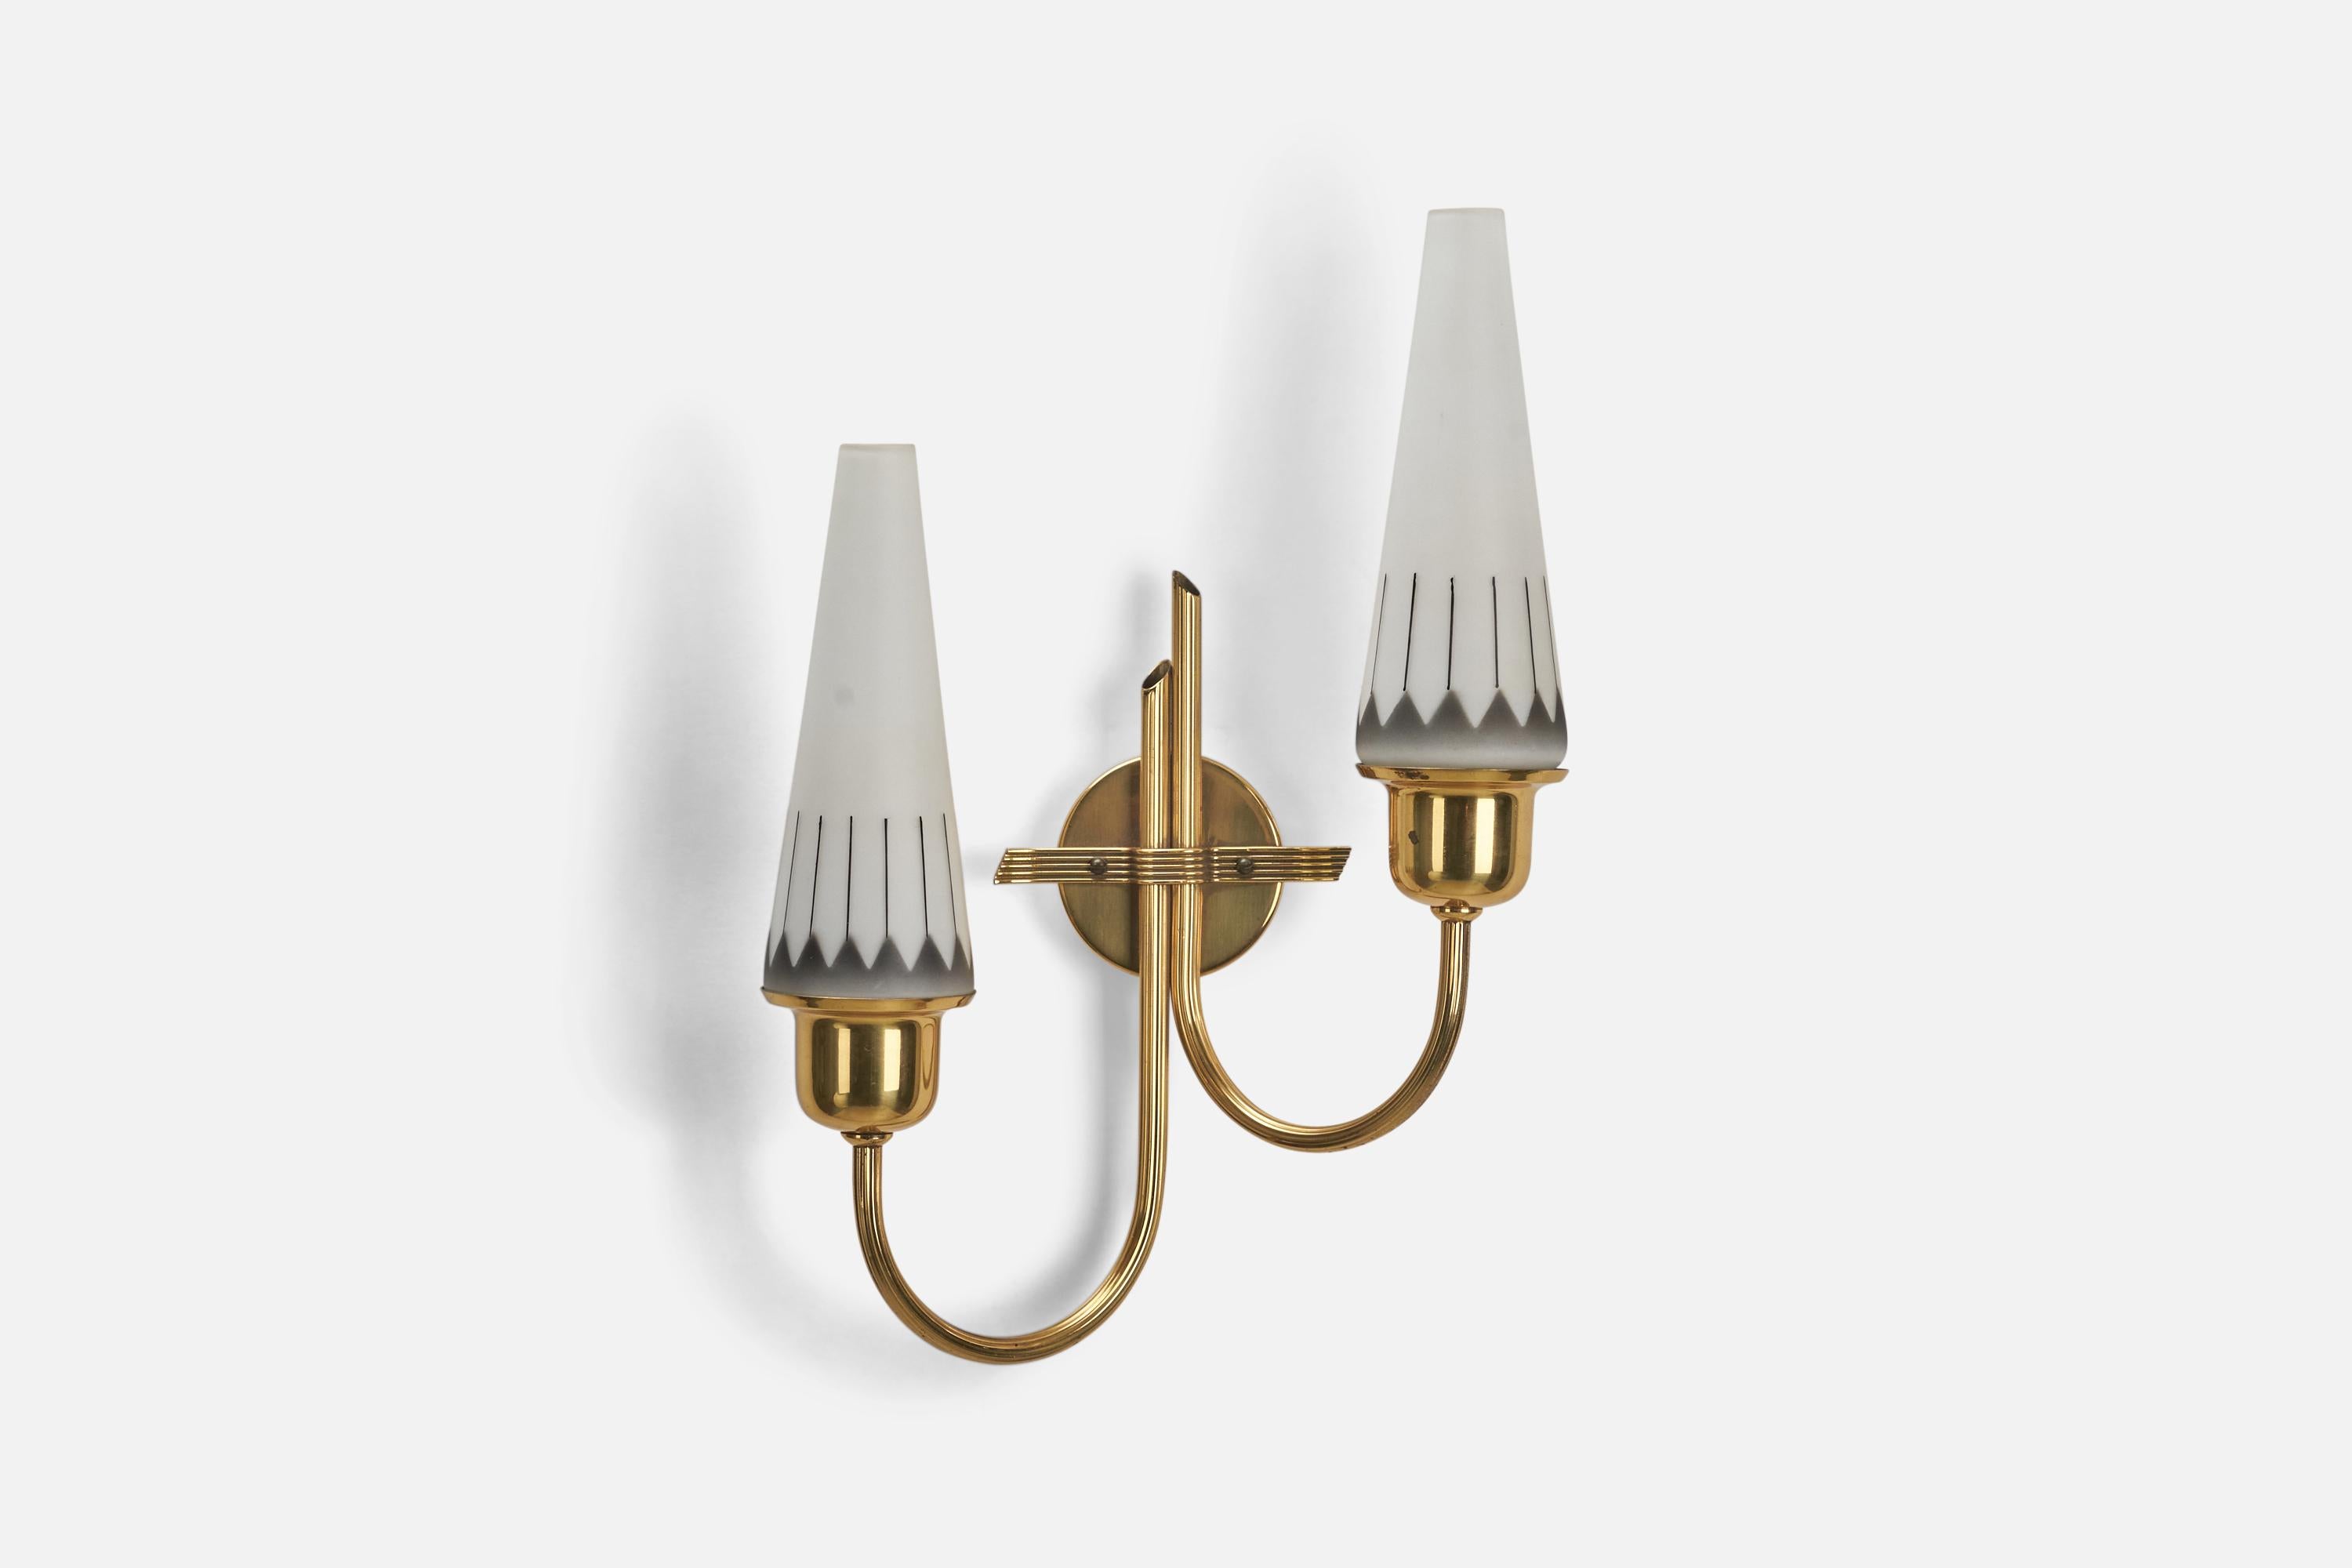 A brass and glass wall light designed and produced in Sweden, 1940s.

Dimensions of Back Plate (inches) : 2.93 x 2.93 x 0.78 (Height x Width x Depth)

Sockets take E-14 bulbs.

There is no maximum wattage stated on the fixture.